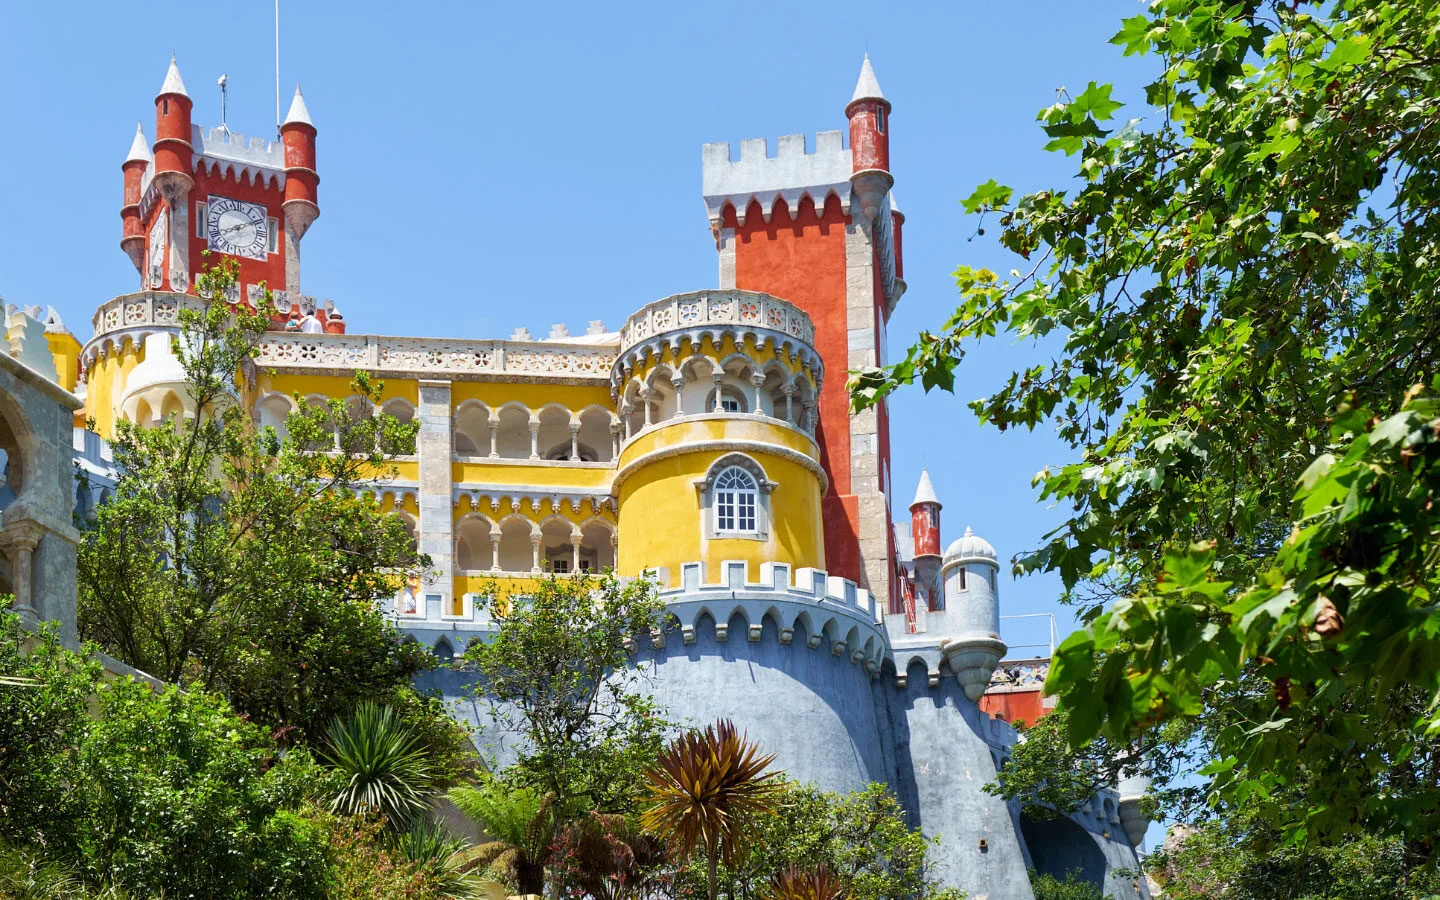 Colourful buildings in Sintra, Portugal